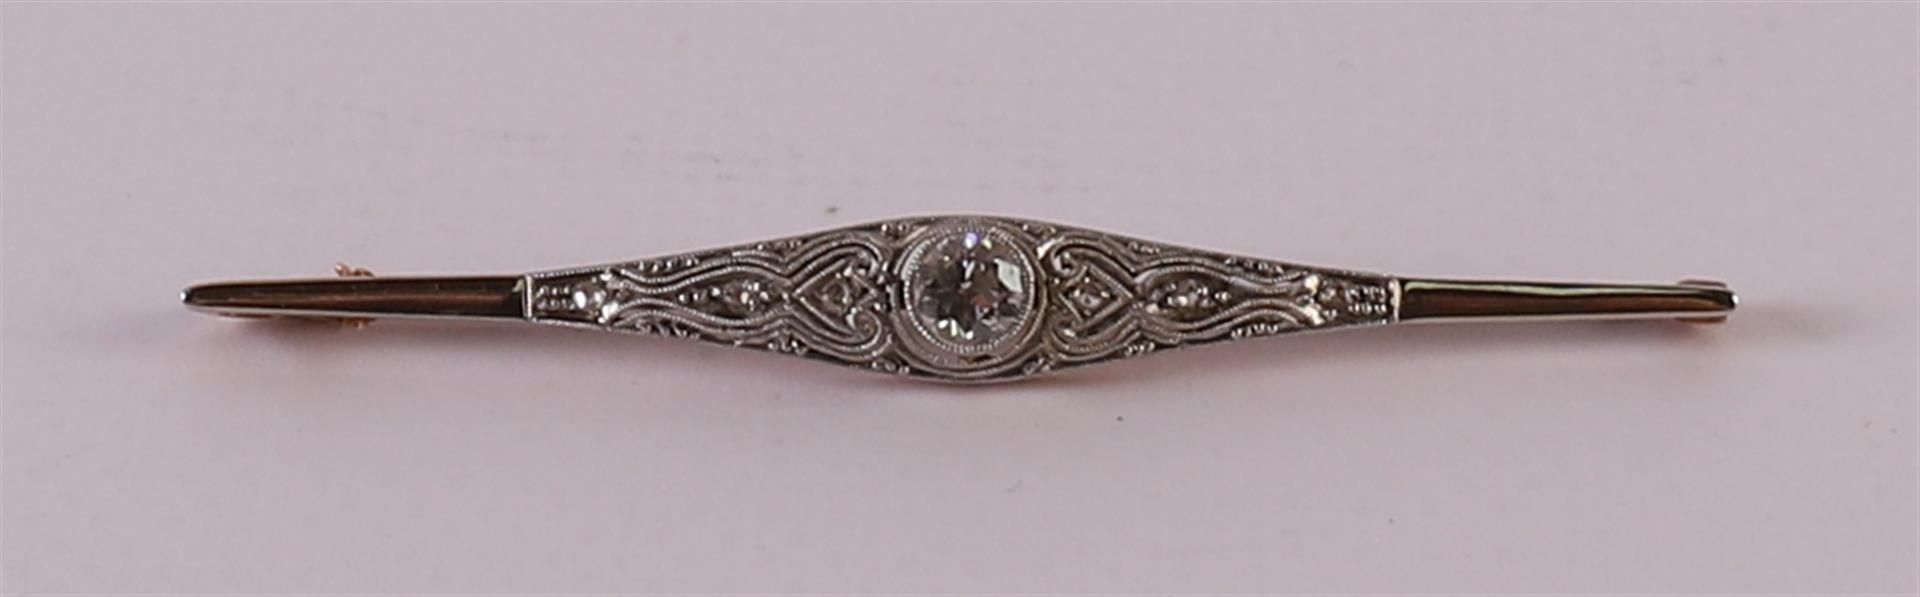 A 14 kt 585/1000 yellow and white gold Art Deco brooch with a brilliant cut diamond in the center of - Image 2 of 3